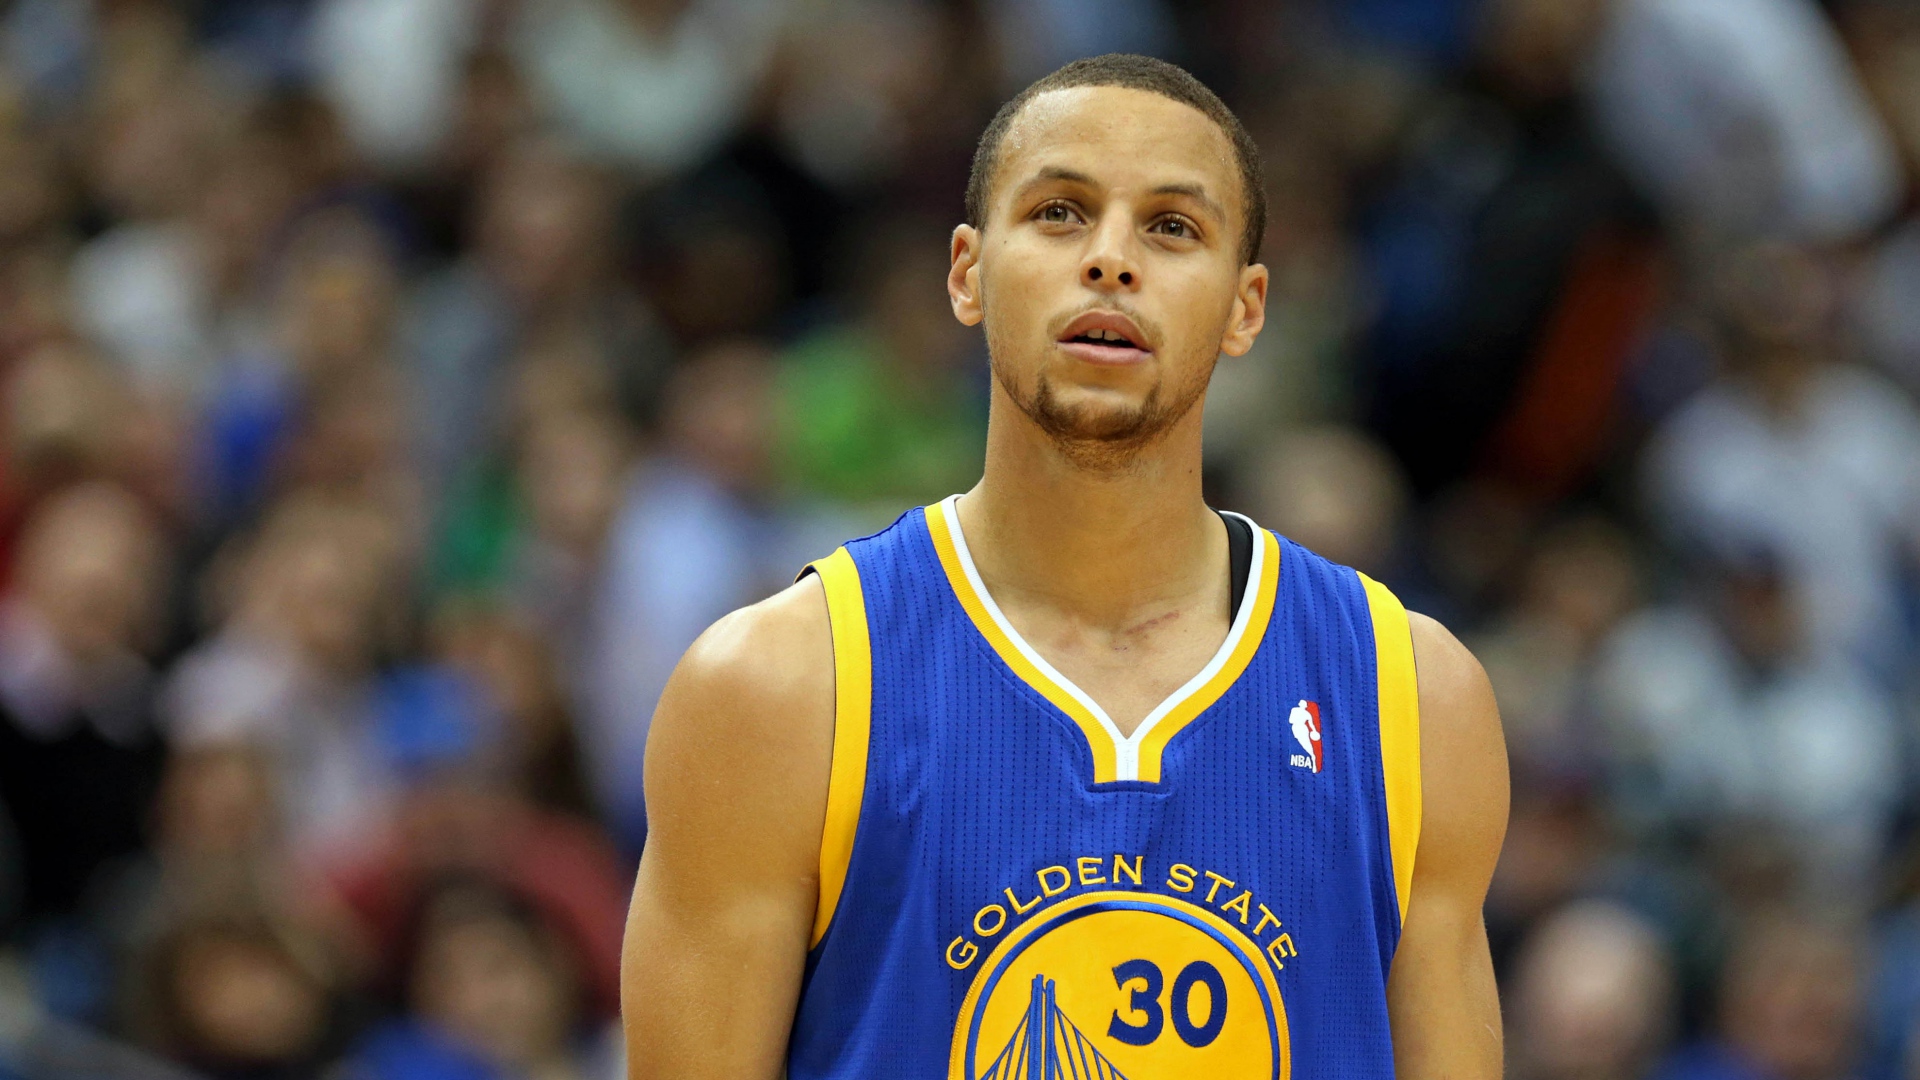 Too pretty to play? Stephen Curry and the light-skinned black athlete